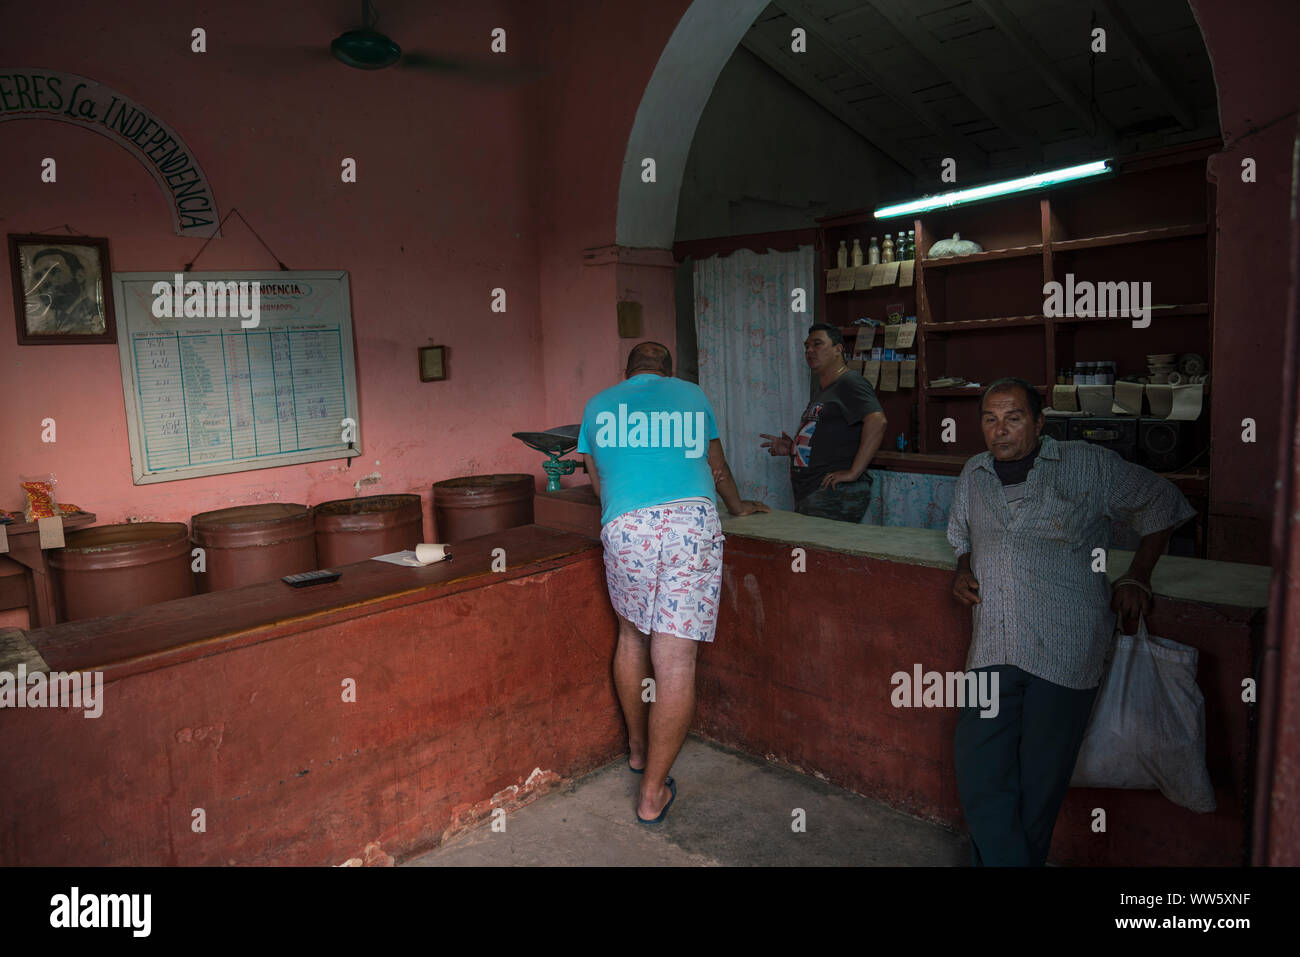 A Bodega, a shop where locals cab buy food and products, like soap, toothpaste, cigarettes, light bulbs for subsidised prices, Trinidad, Cuba Stock Photo